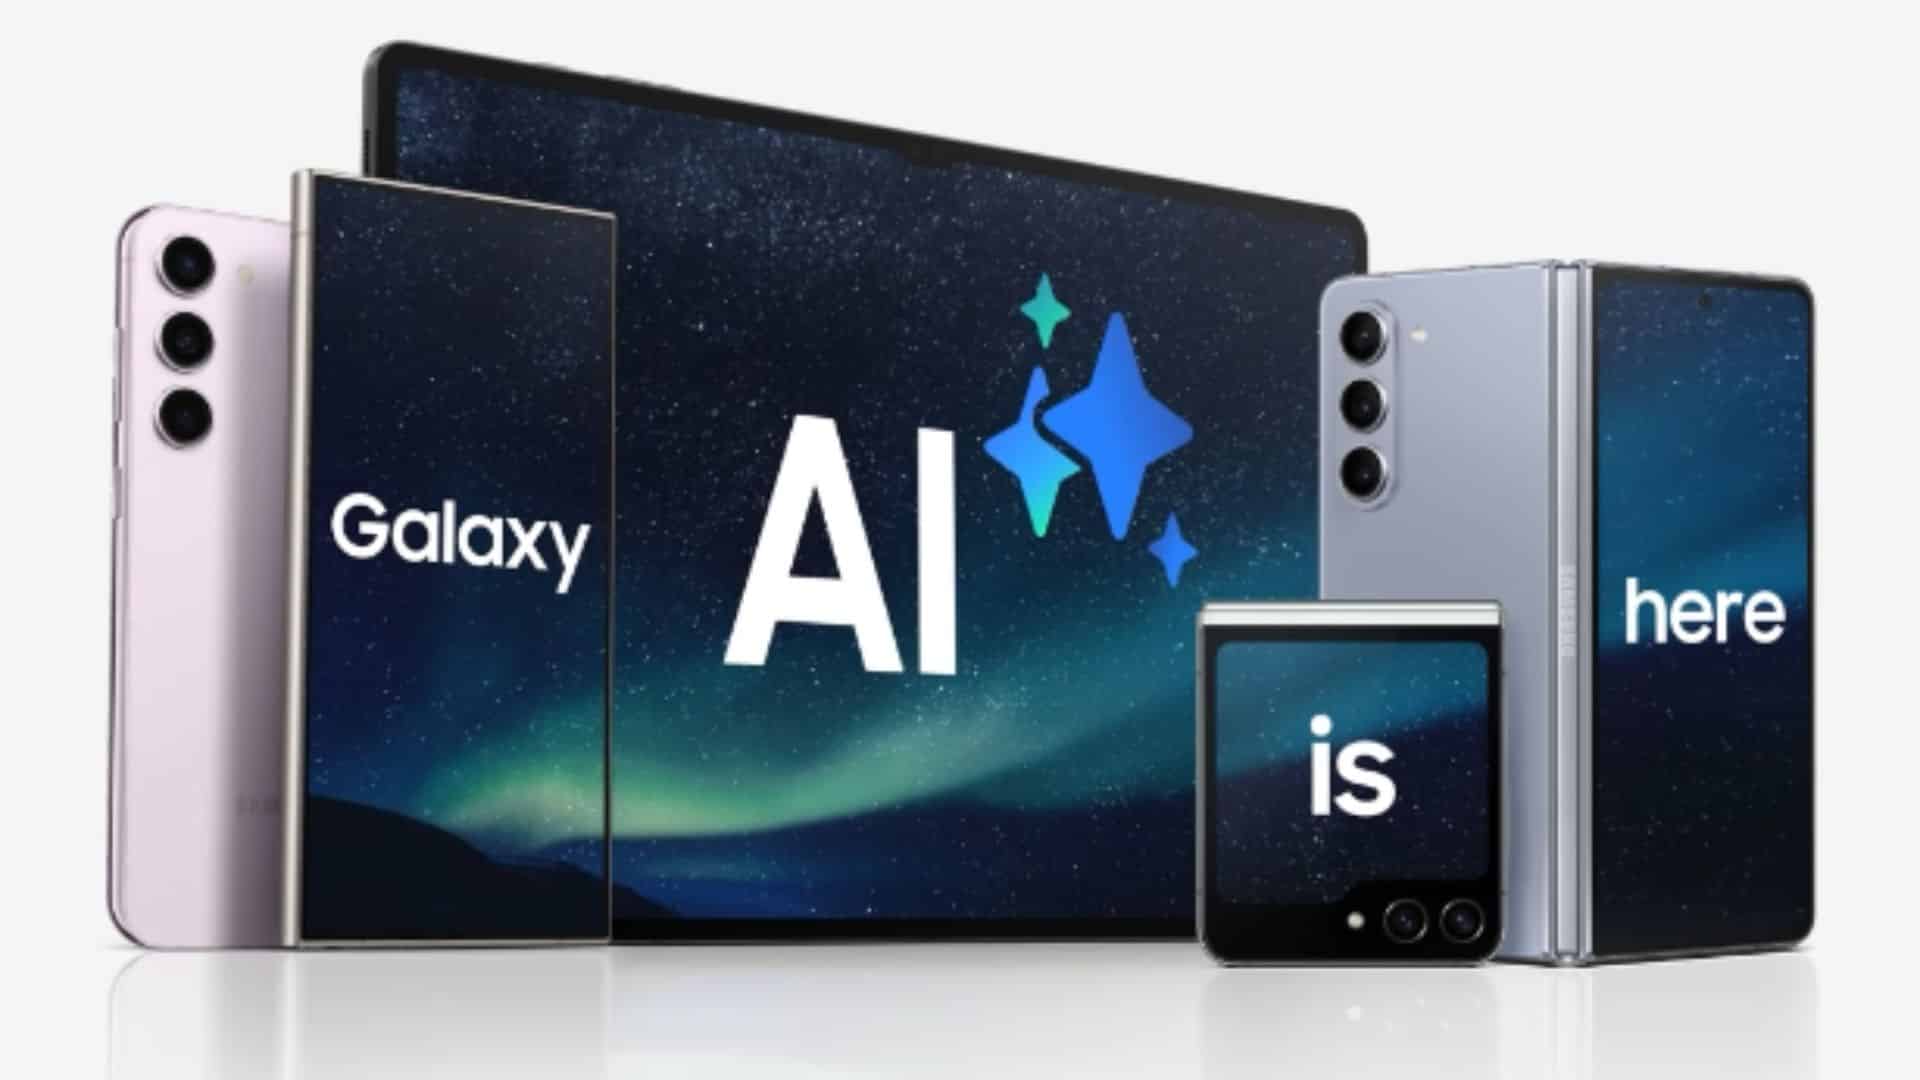 Galaxy AI Has Arrived At EE